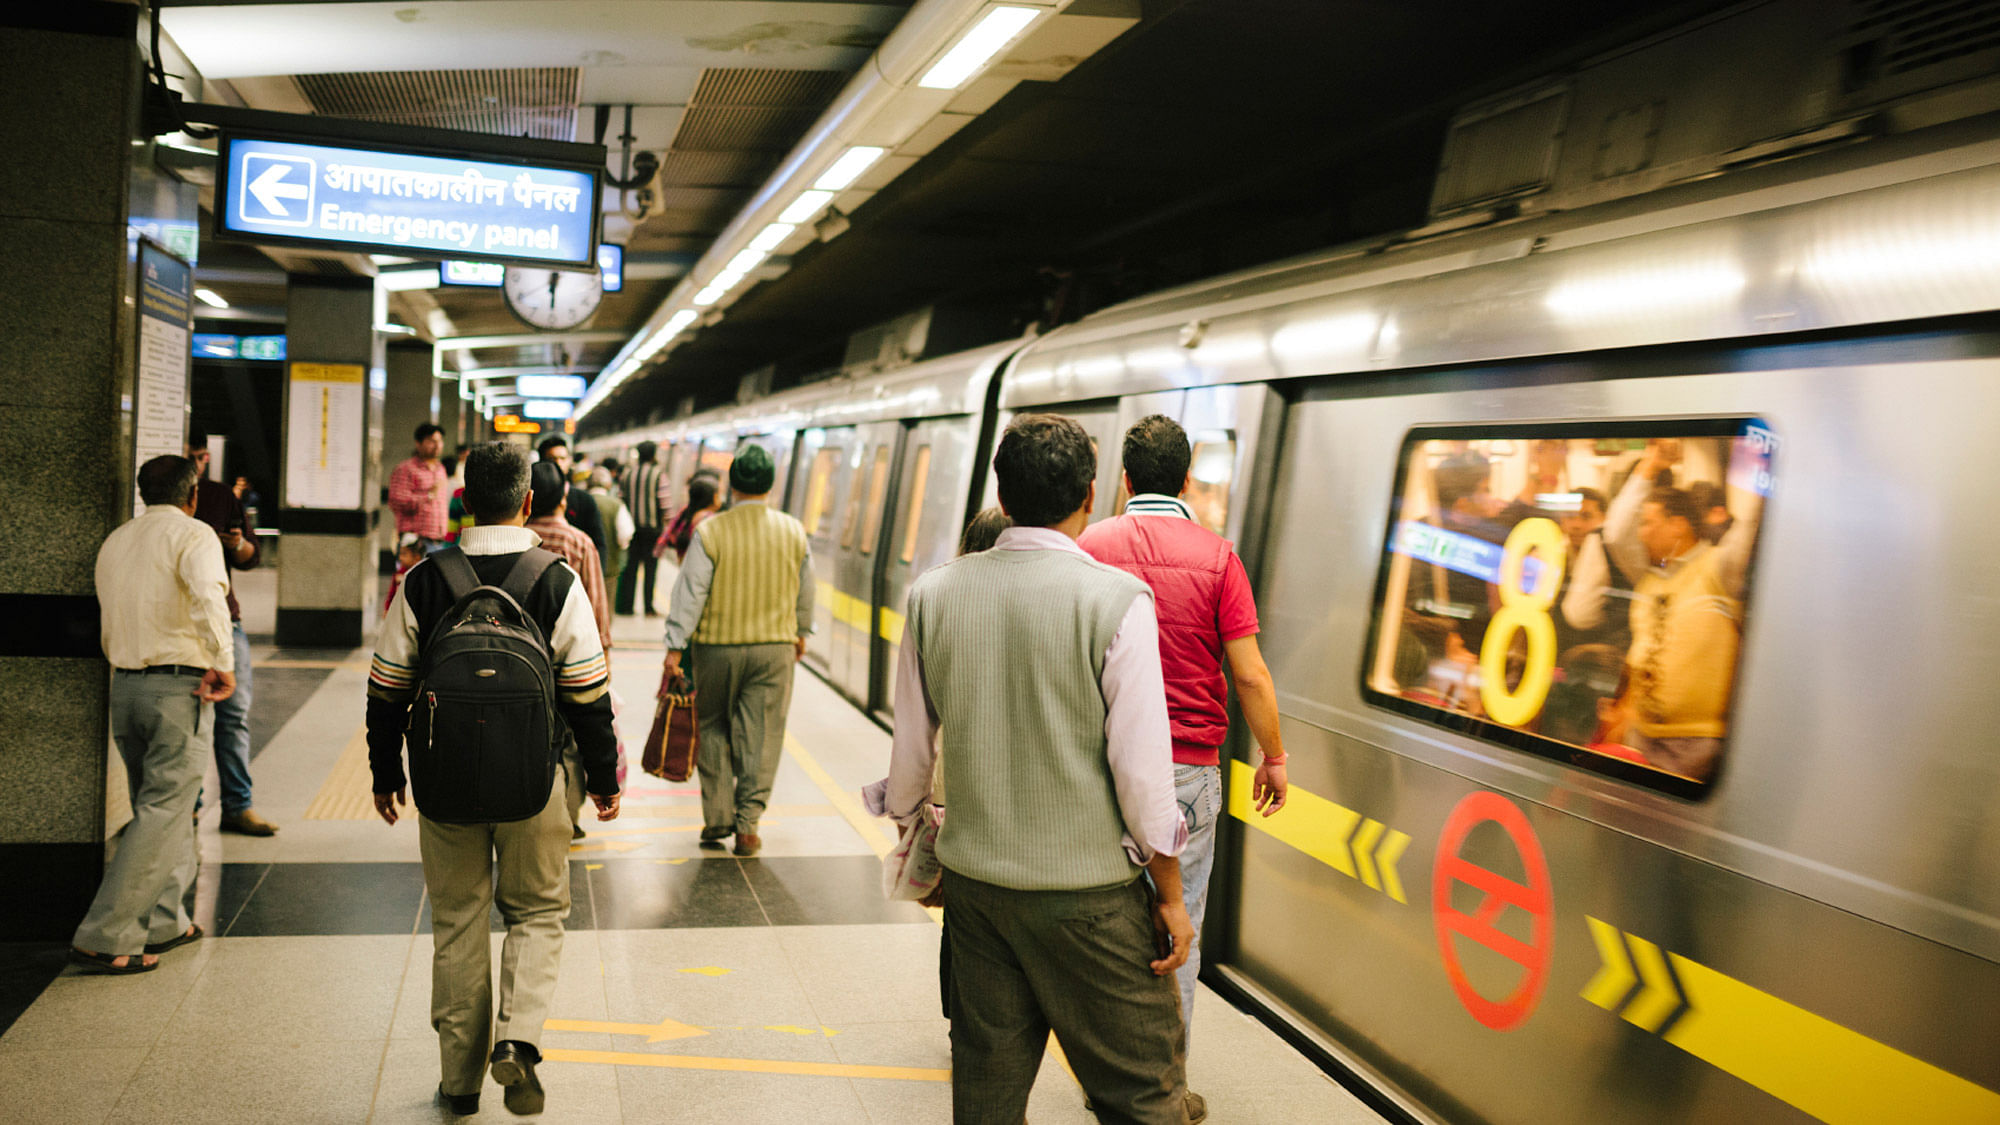 A committee has been set up by the DMRC to probe the incident. Image used for representational purpose. (Photo: iStock)